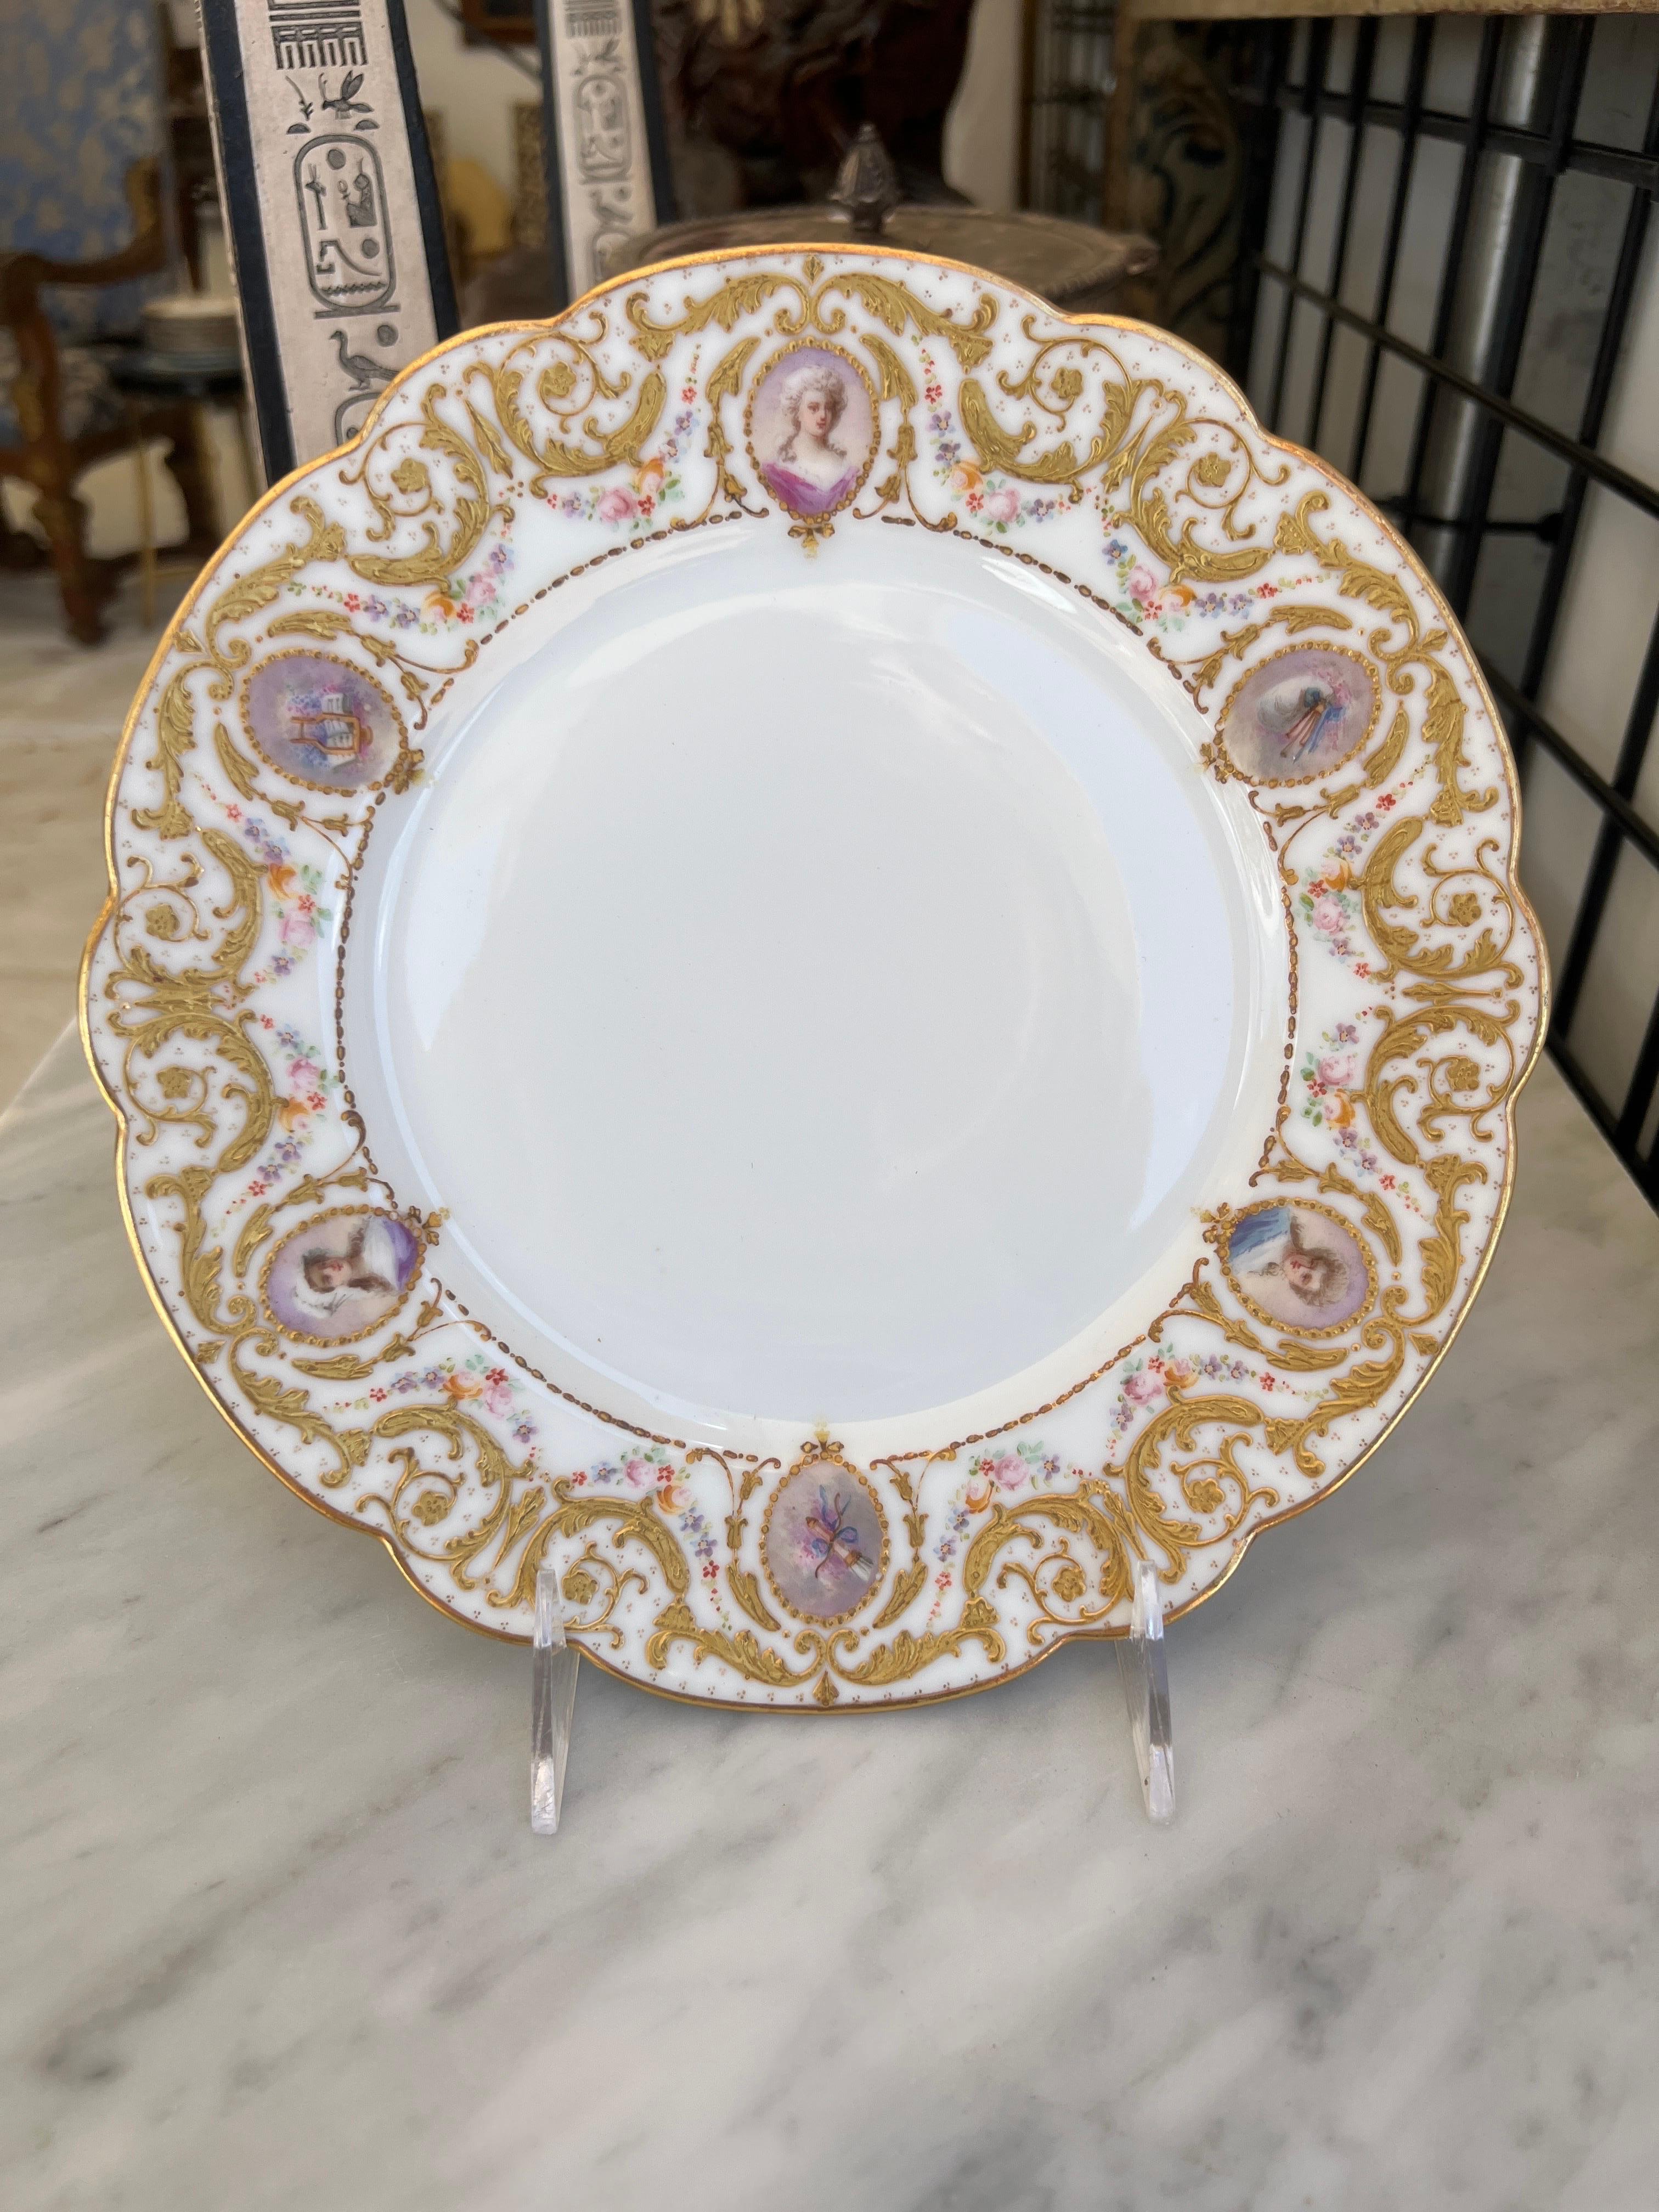 French origin, late 19th century and retailed by the great Raphael Weill & Company San Francisco. 

Each plate is meticulously hand enameled with gold, purple, blue and other polychromed motifs. With three important female figure windows and three